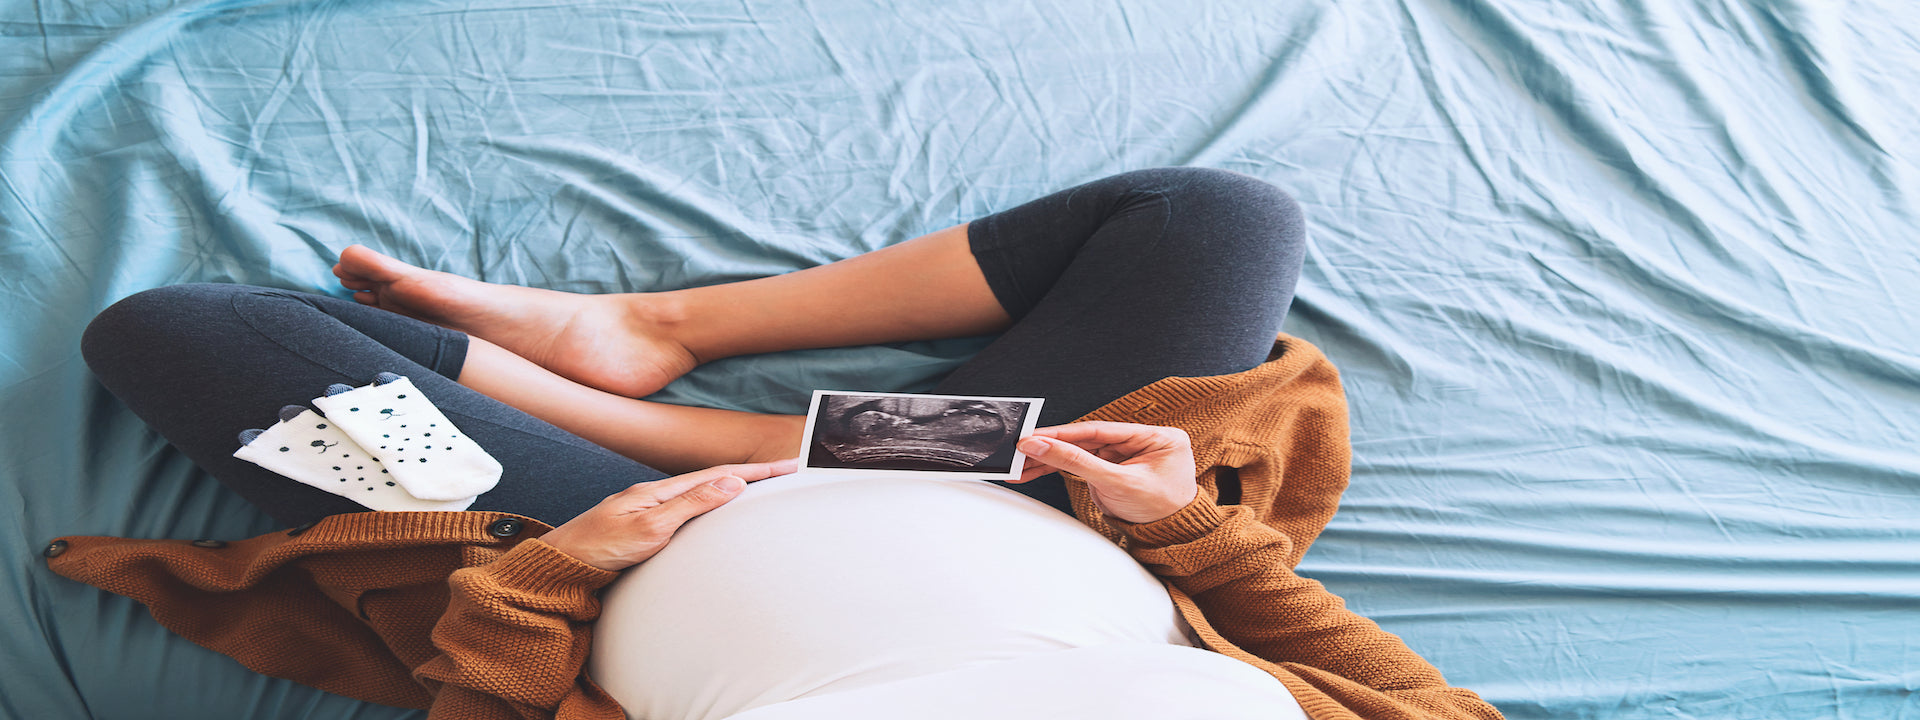 Is Ultrasound worthwhile for Pregnant Women?